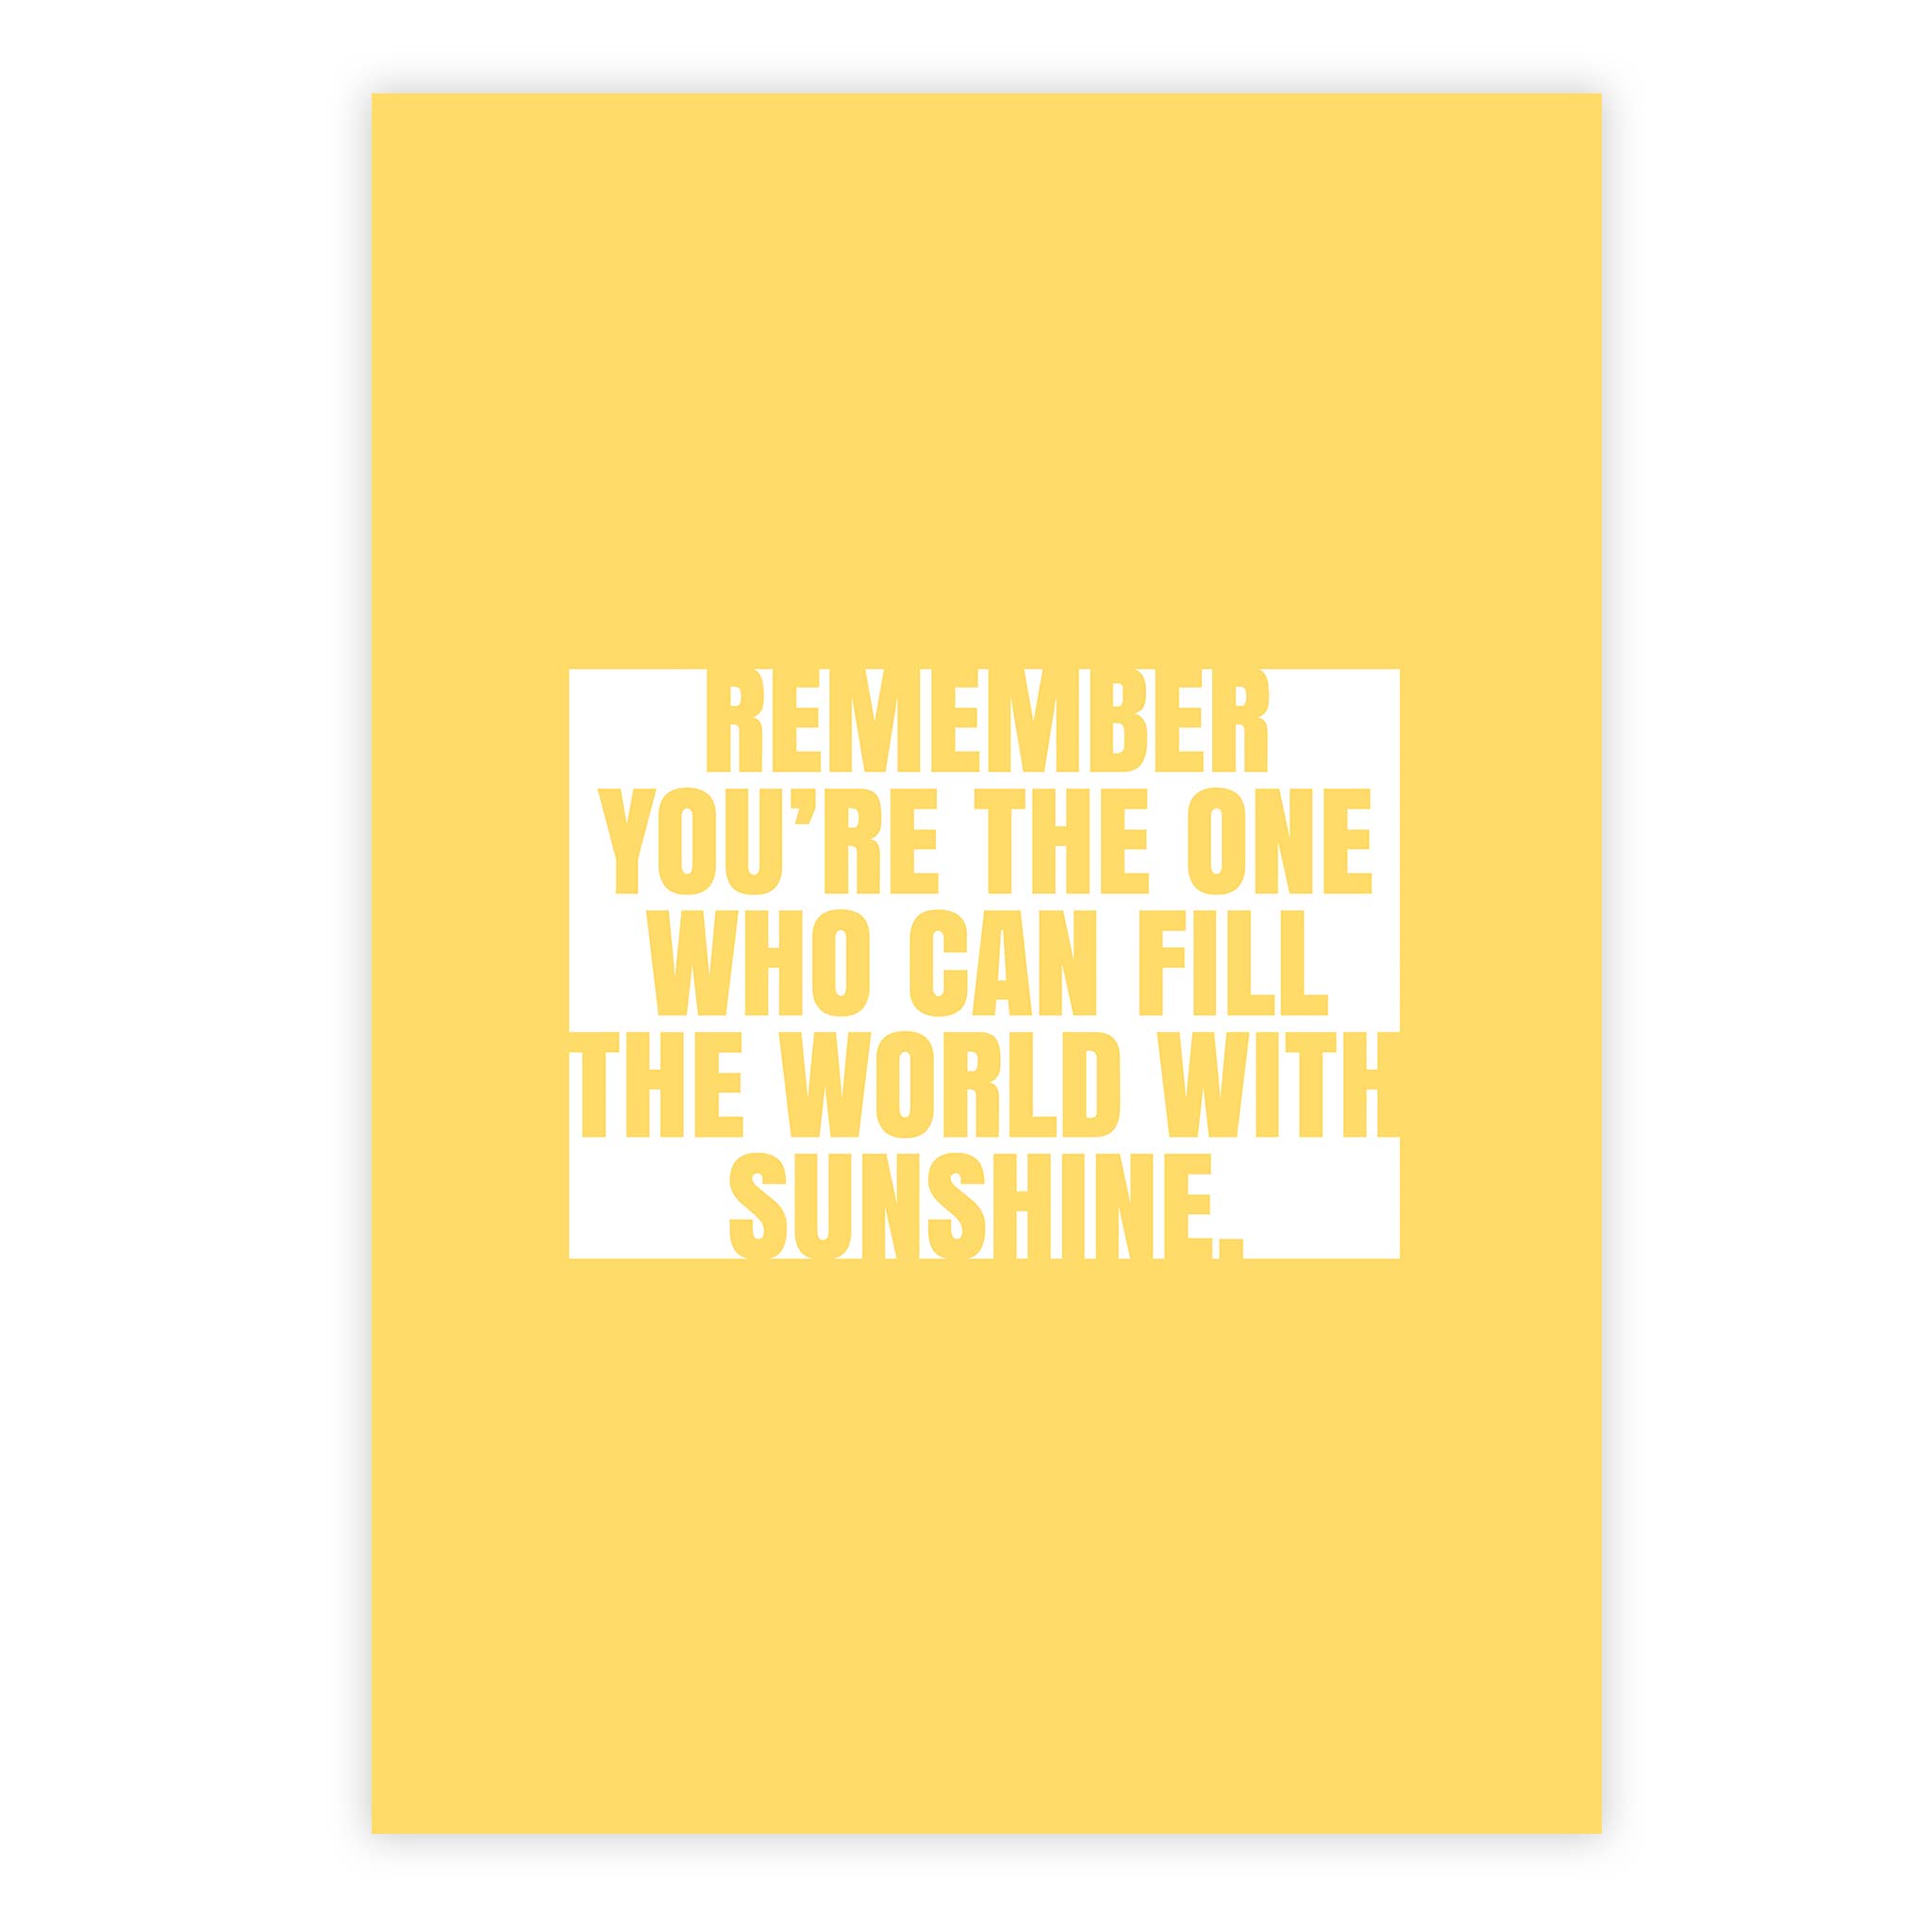 Remember you’re the one who can fill the world with sunshine